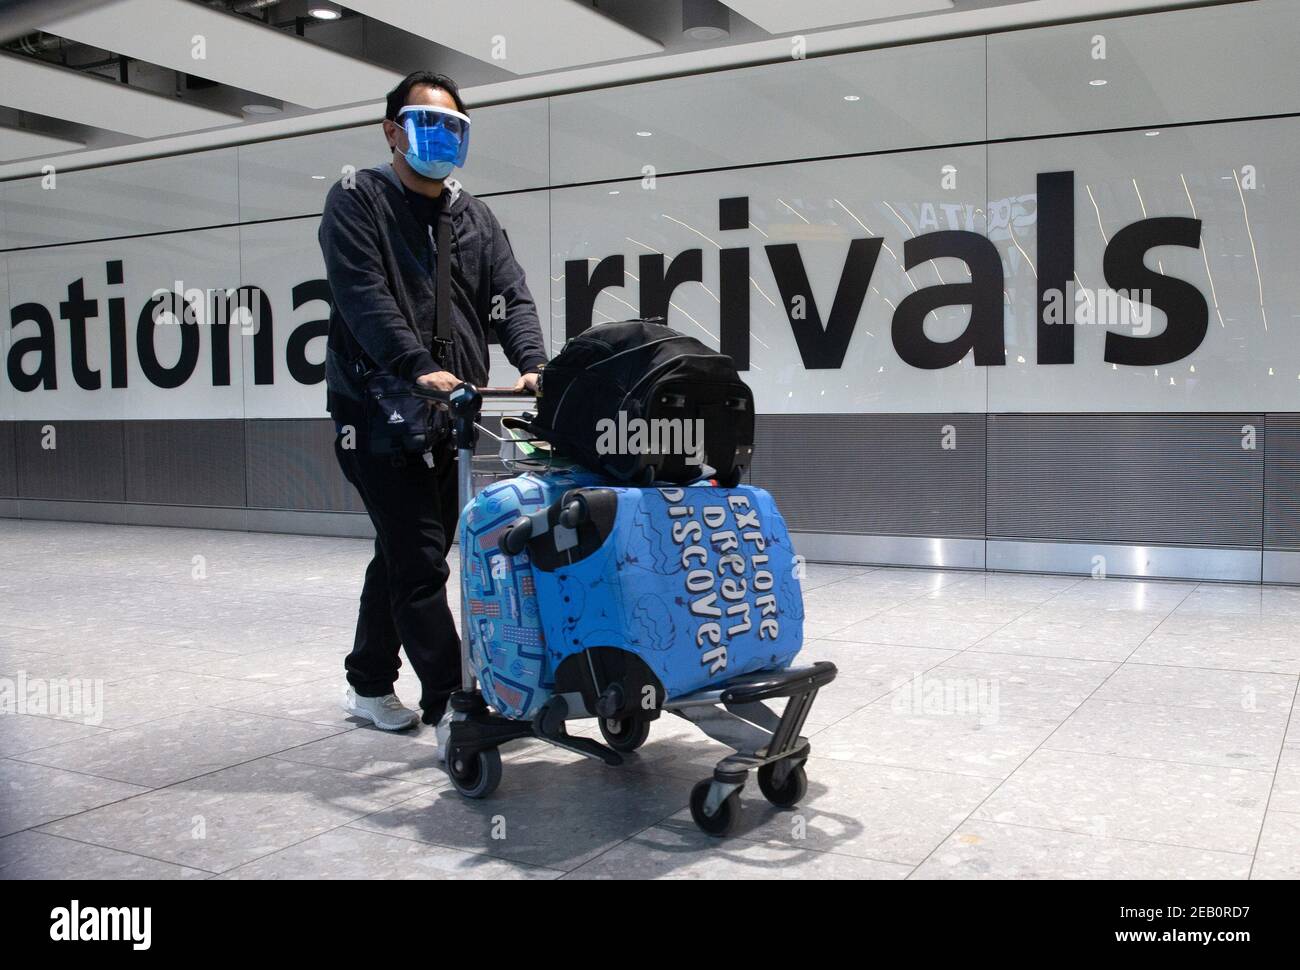 London, UK. 11th Feb, 2021. International Arrivals at Heathrow Terminal 5. People arriving in England from 'red list' countries, including UK residents, must isolate for 10 days in hotels, costing £1,750 from February 15th. Health Secretary made the announcement in the House of Commons on FEbraury 10th. Credit: Mark Thomas/Alamy Live News Stock Photo